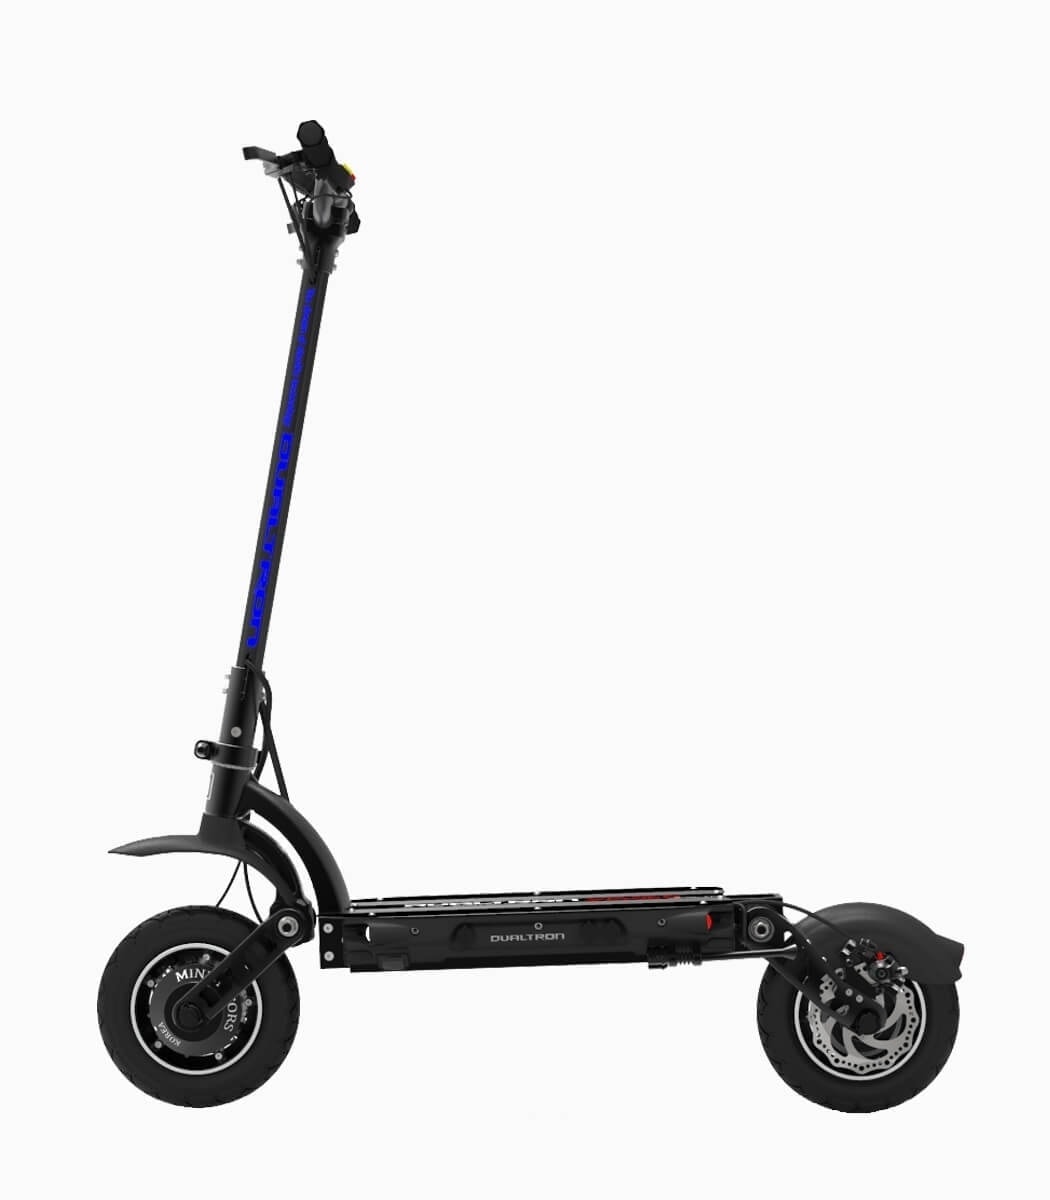 DUALTRON SPIDER (BLACK17.5AH) UL2272 certified high performance electric scooter left